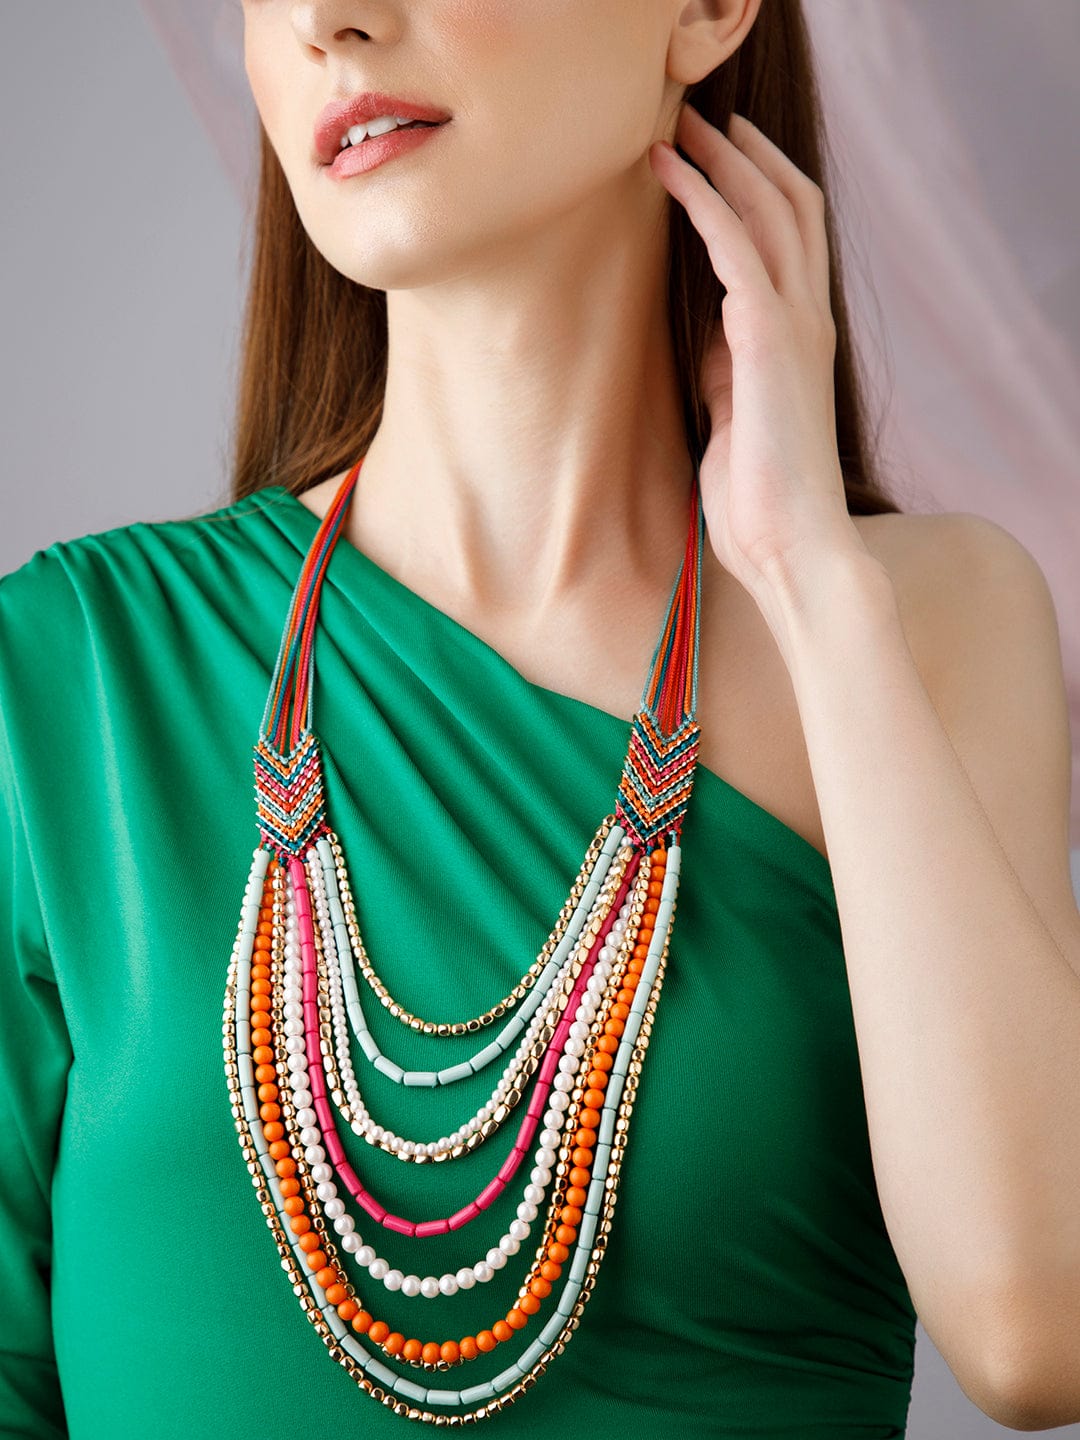 Rubans Voguish Multicolour Beaded Necklace With Layered Design Necklaces, Necklace Sets, Chains & Mangalsutra